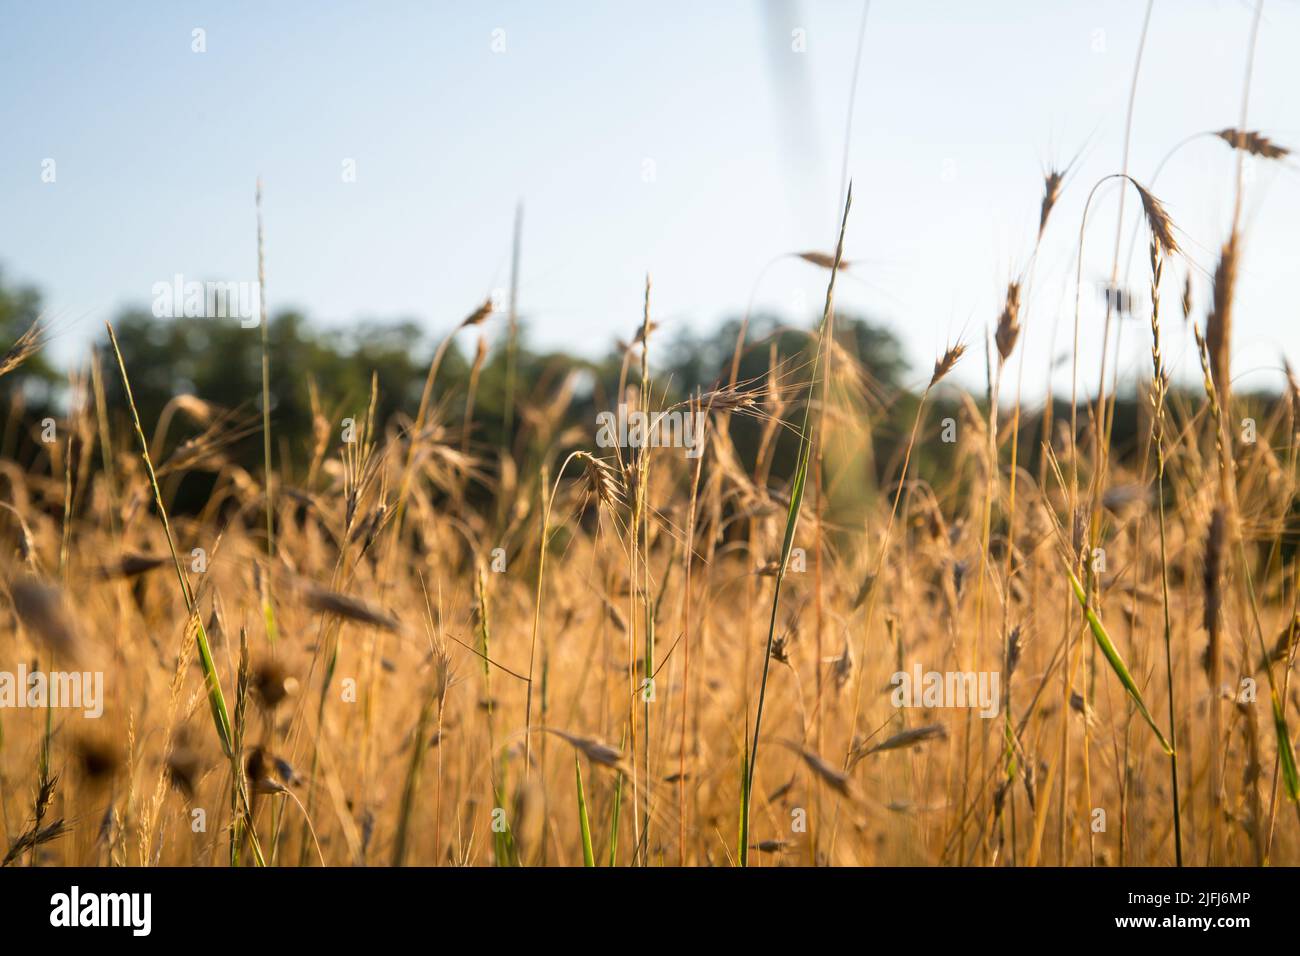 Corn field in the evening sun, Oder-Neisse Cycle Route, Lausitz, Brandenburg, Germany Stock Photo